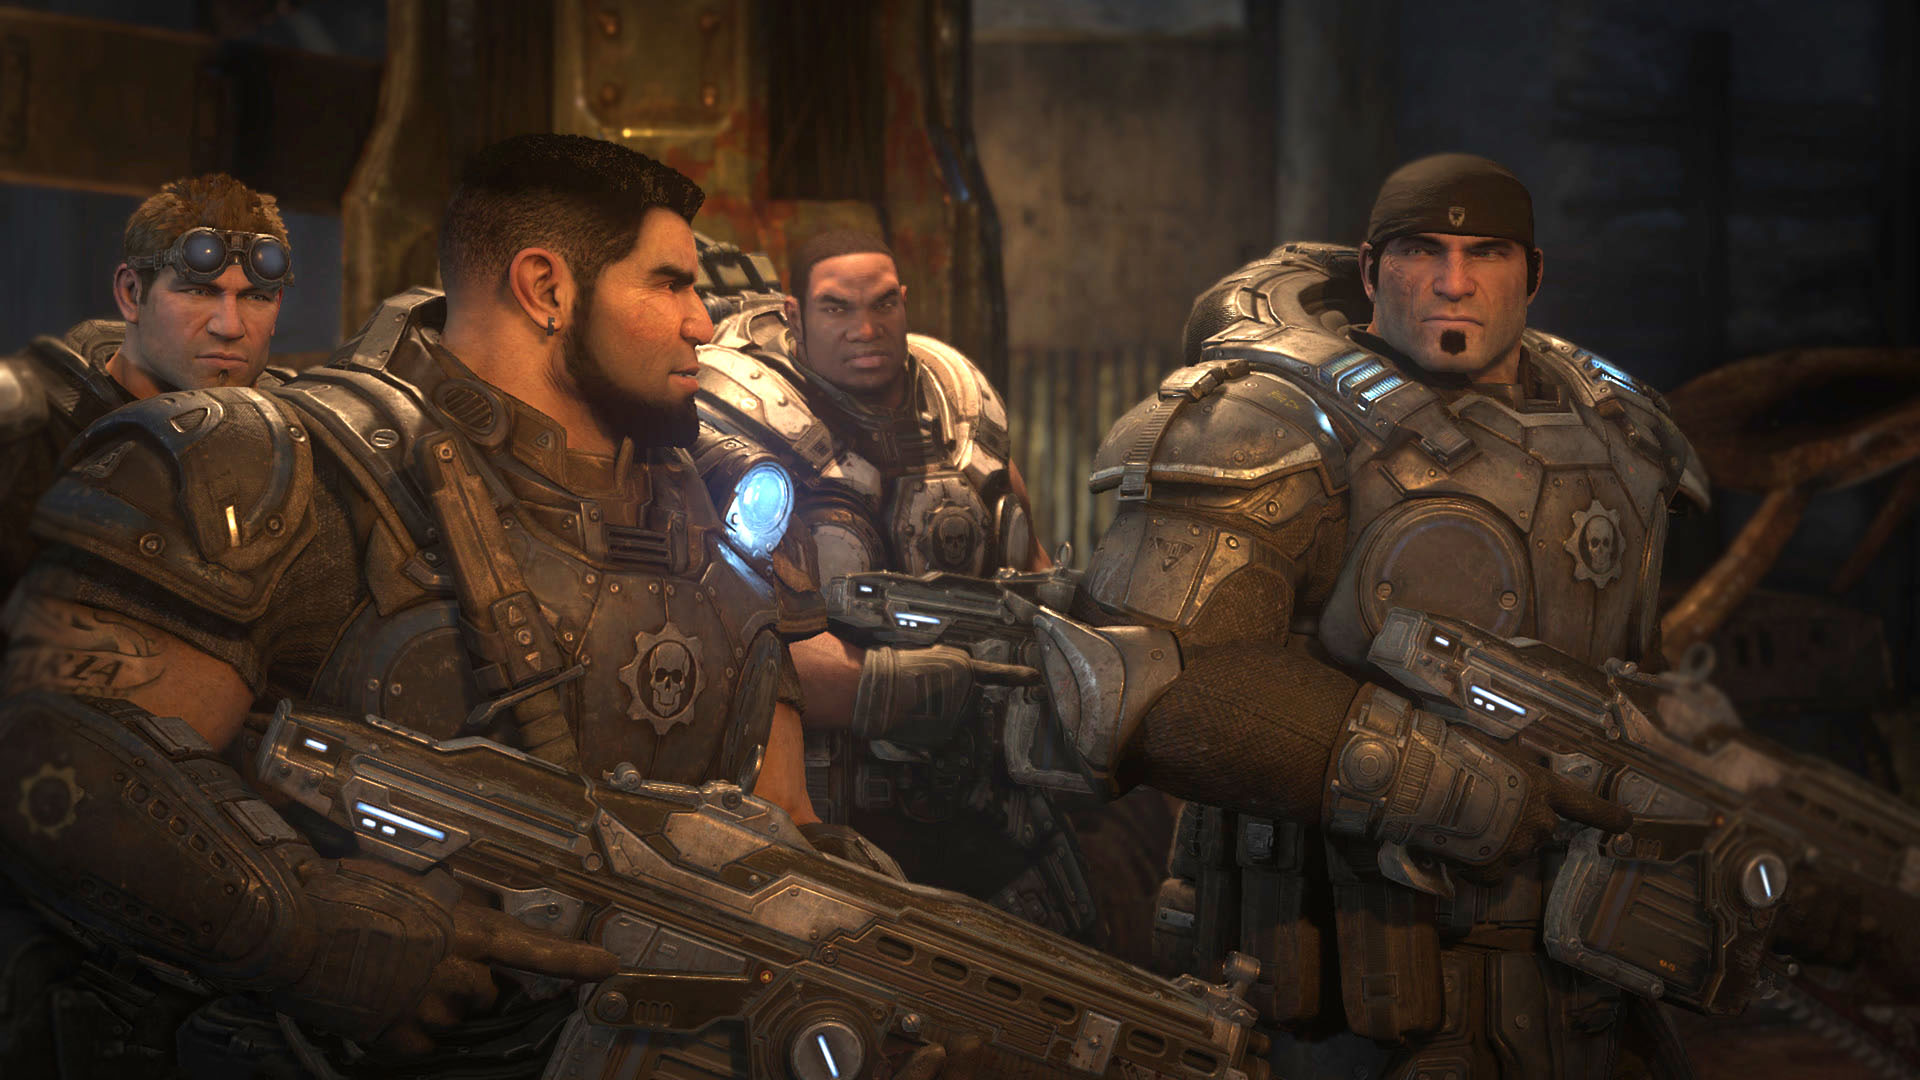 Gears of War Collection reportedly still happening